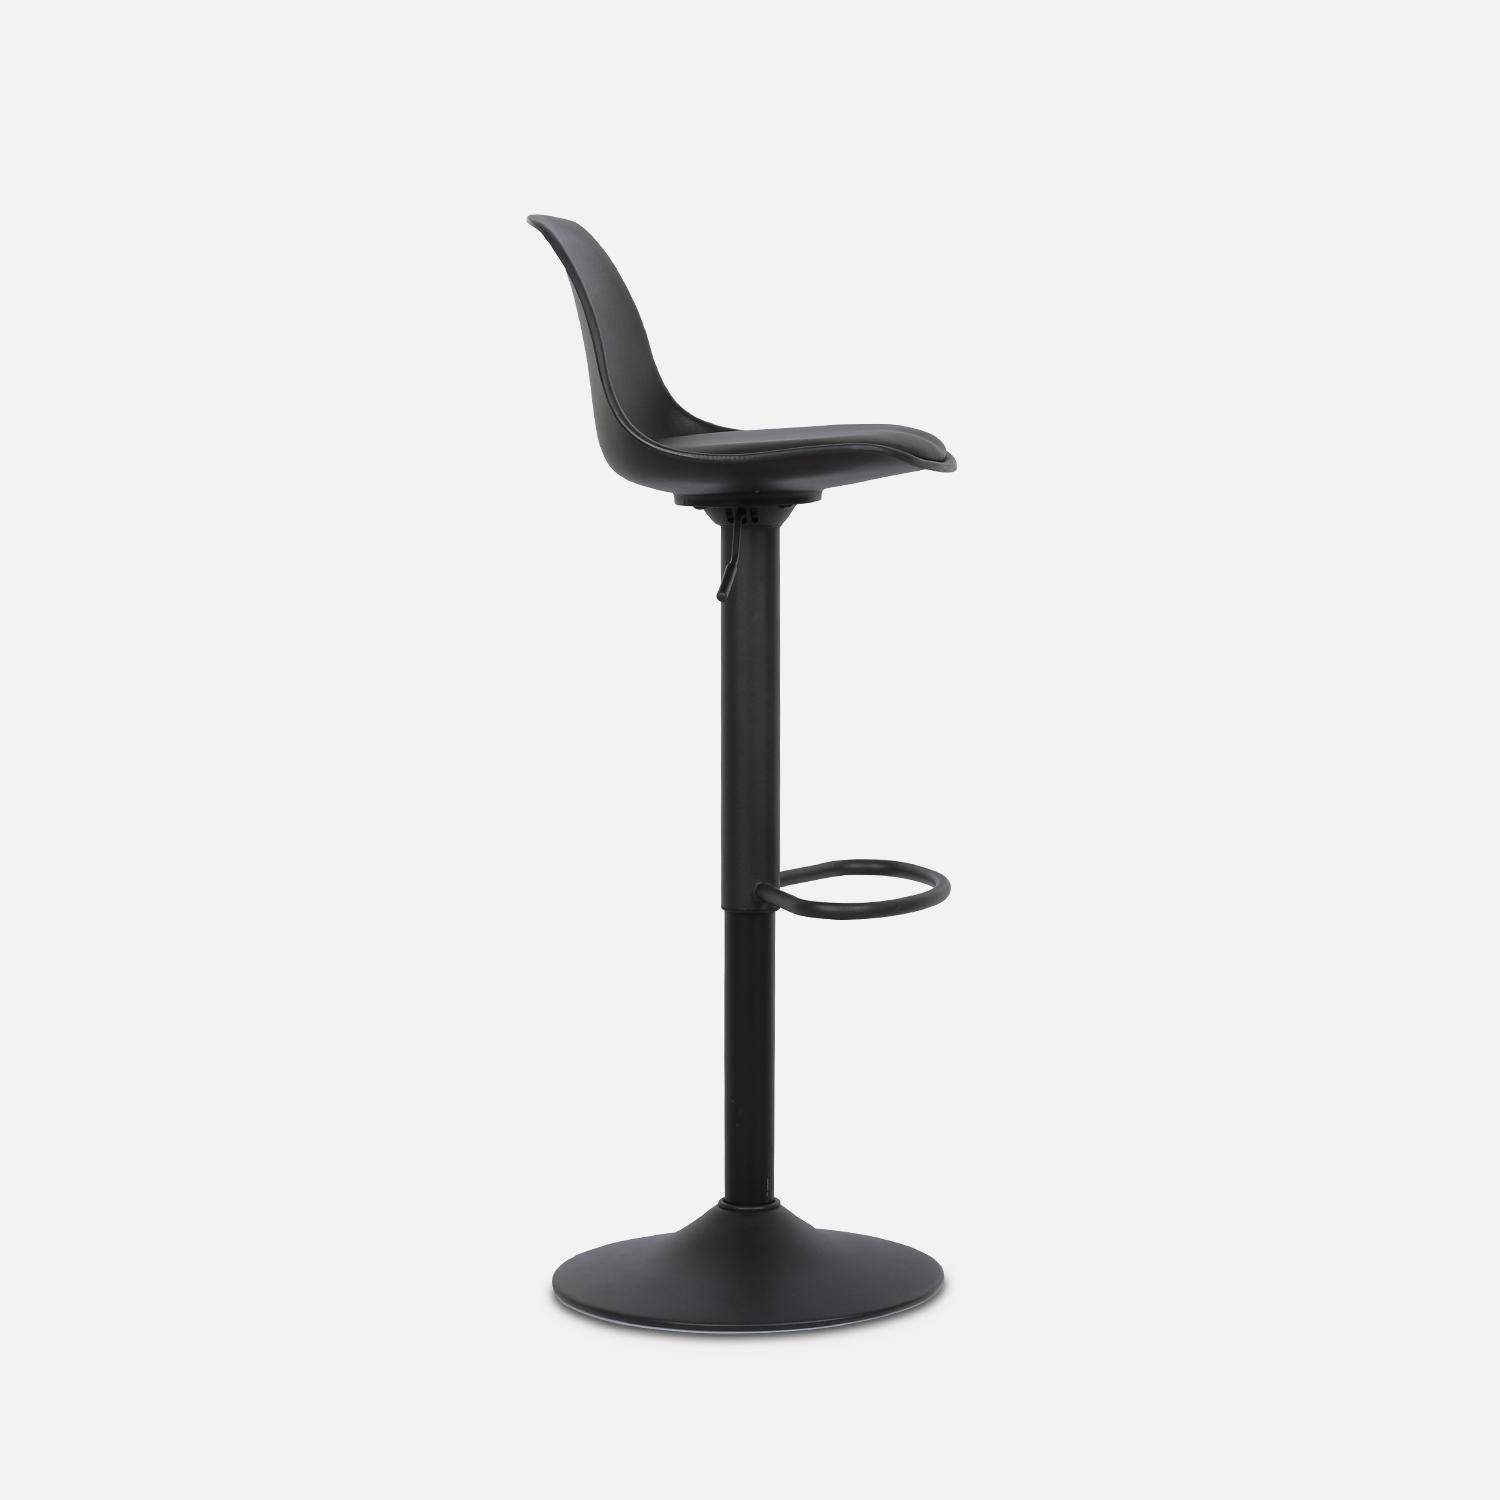 Pair of faux leather, rounded backrest, adjustable bar stools, seat height 61.5 - 83.5cm - Noah - Black,sweeek,Photo6